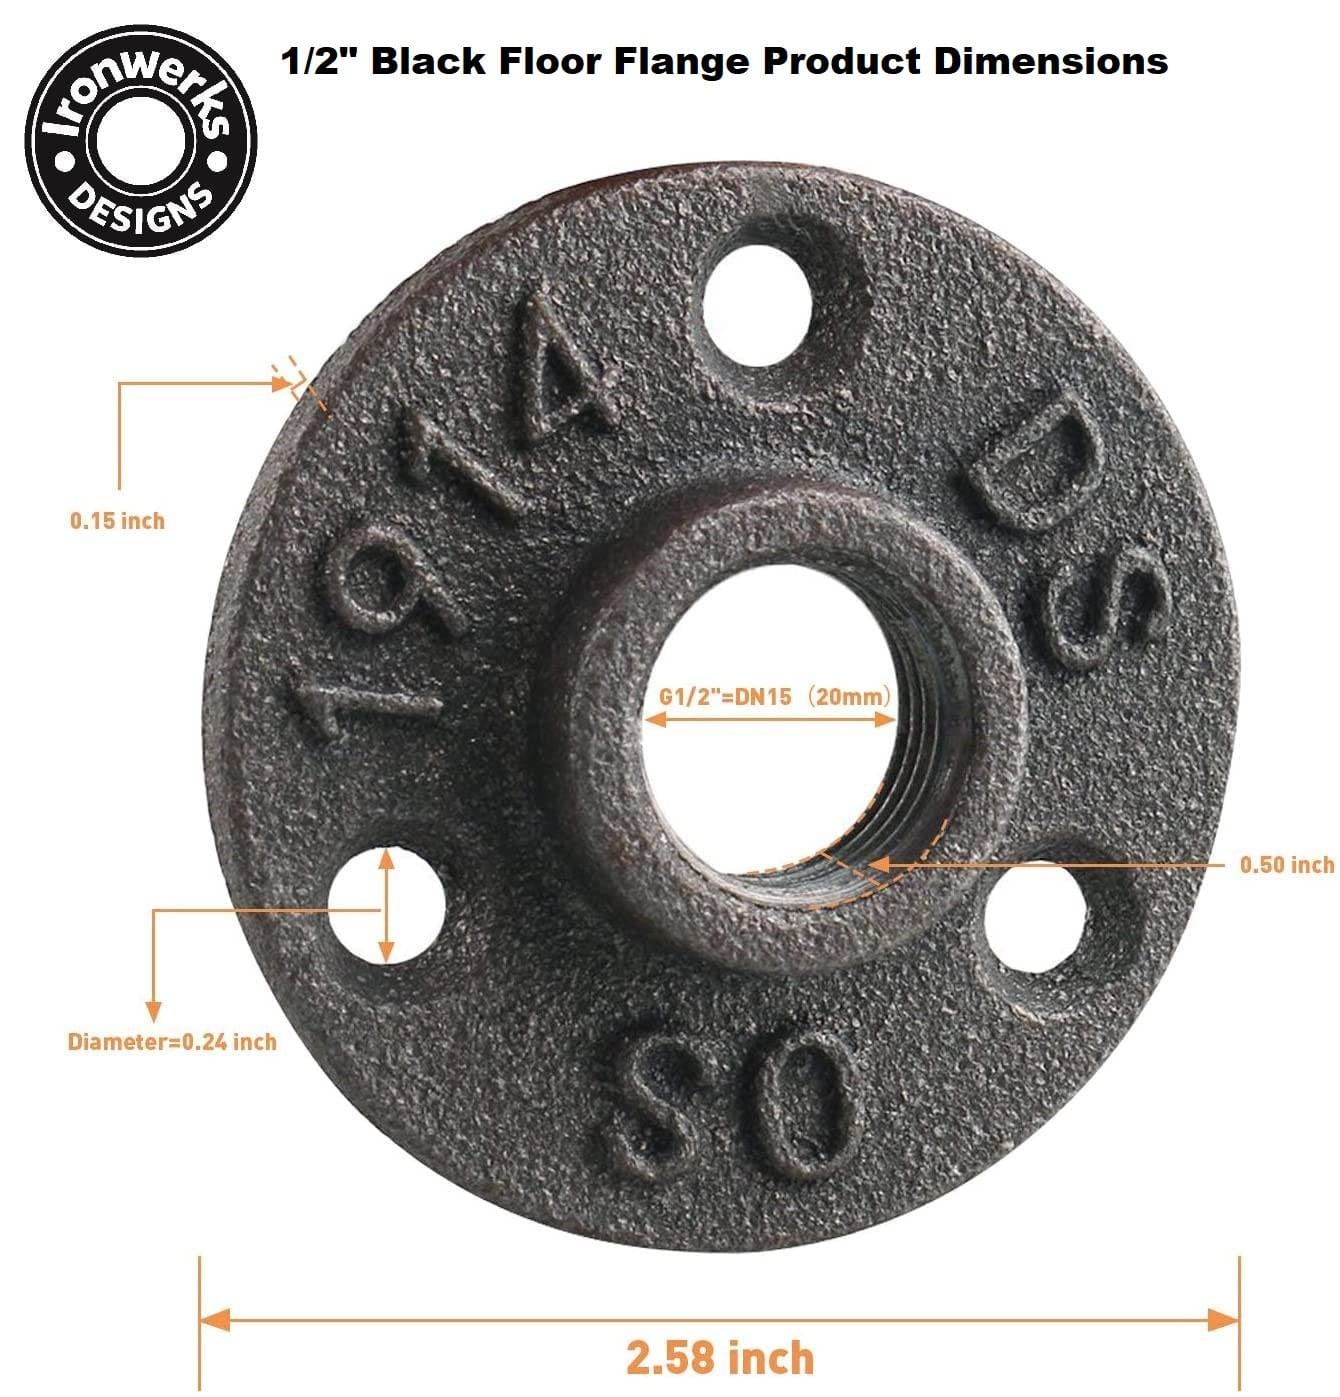 1/2" Black Floor Flange For Pipe Furniture - 3 Hole - Box of 250